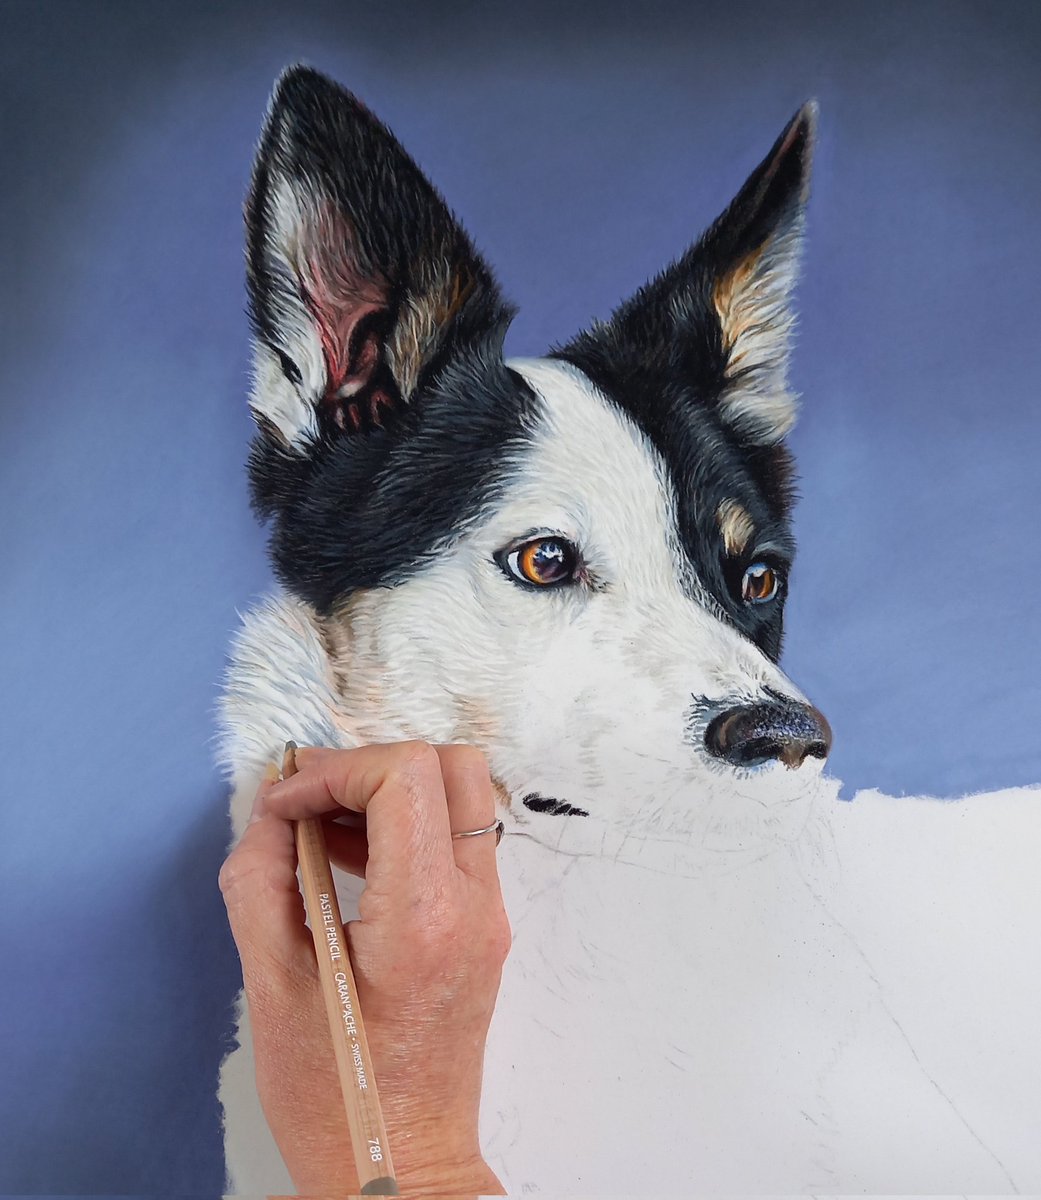 Dolly is my next comission, she's a border collie,miniature Australian Shepherd and Cattle dog.I previously drew her owner's other dog, Lucy, in the same colours a few months ago.
#bordercollie
#australianshepherd #collie
#cattledog #dogportrait #petportraitartist #pastelportrait